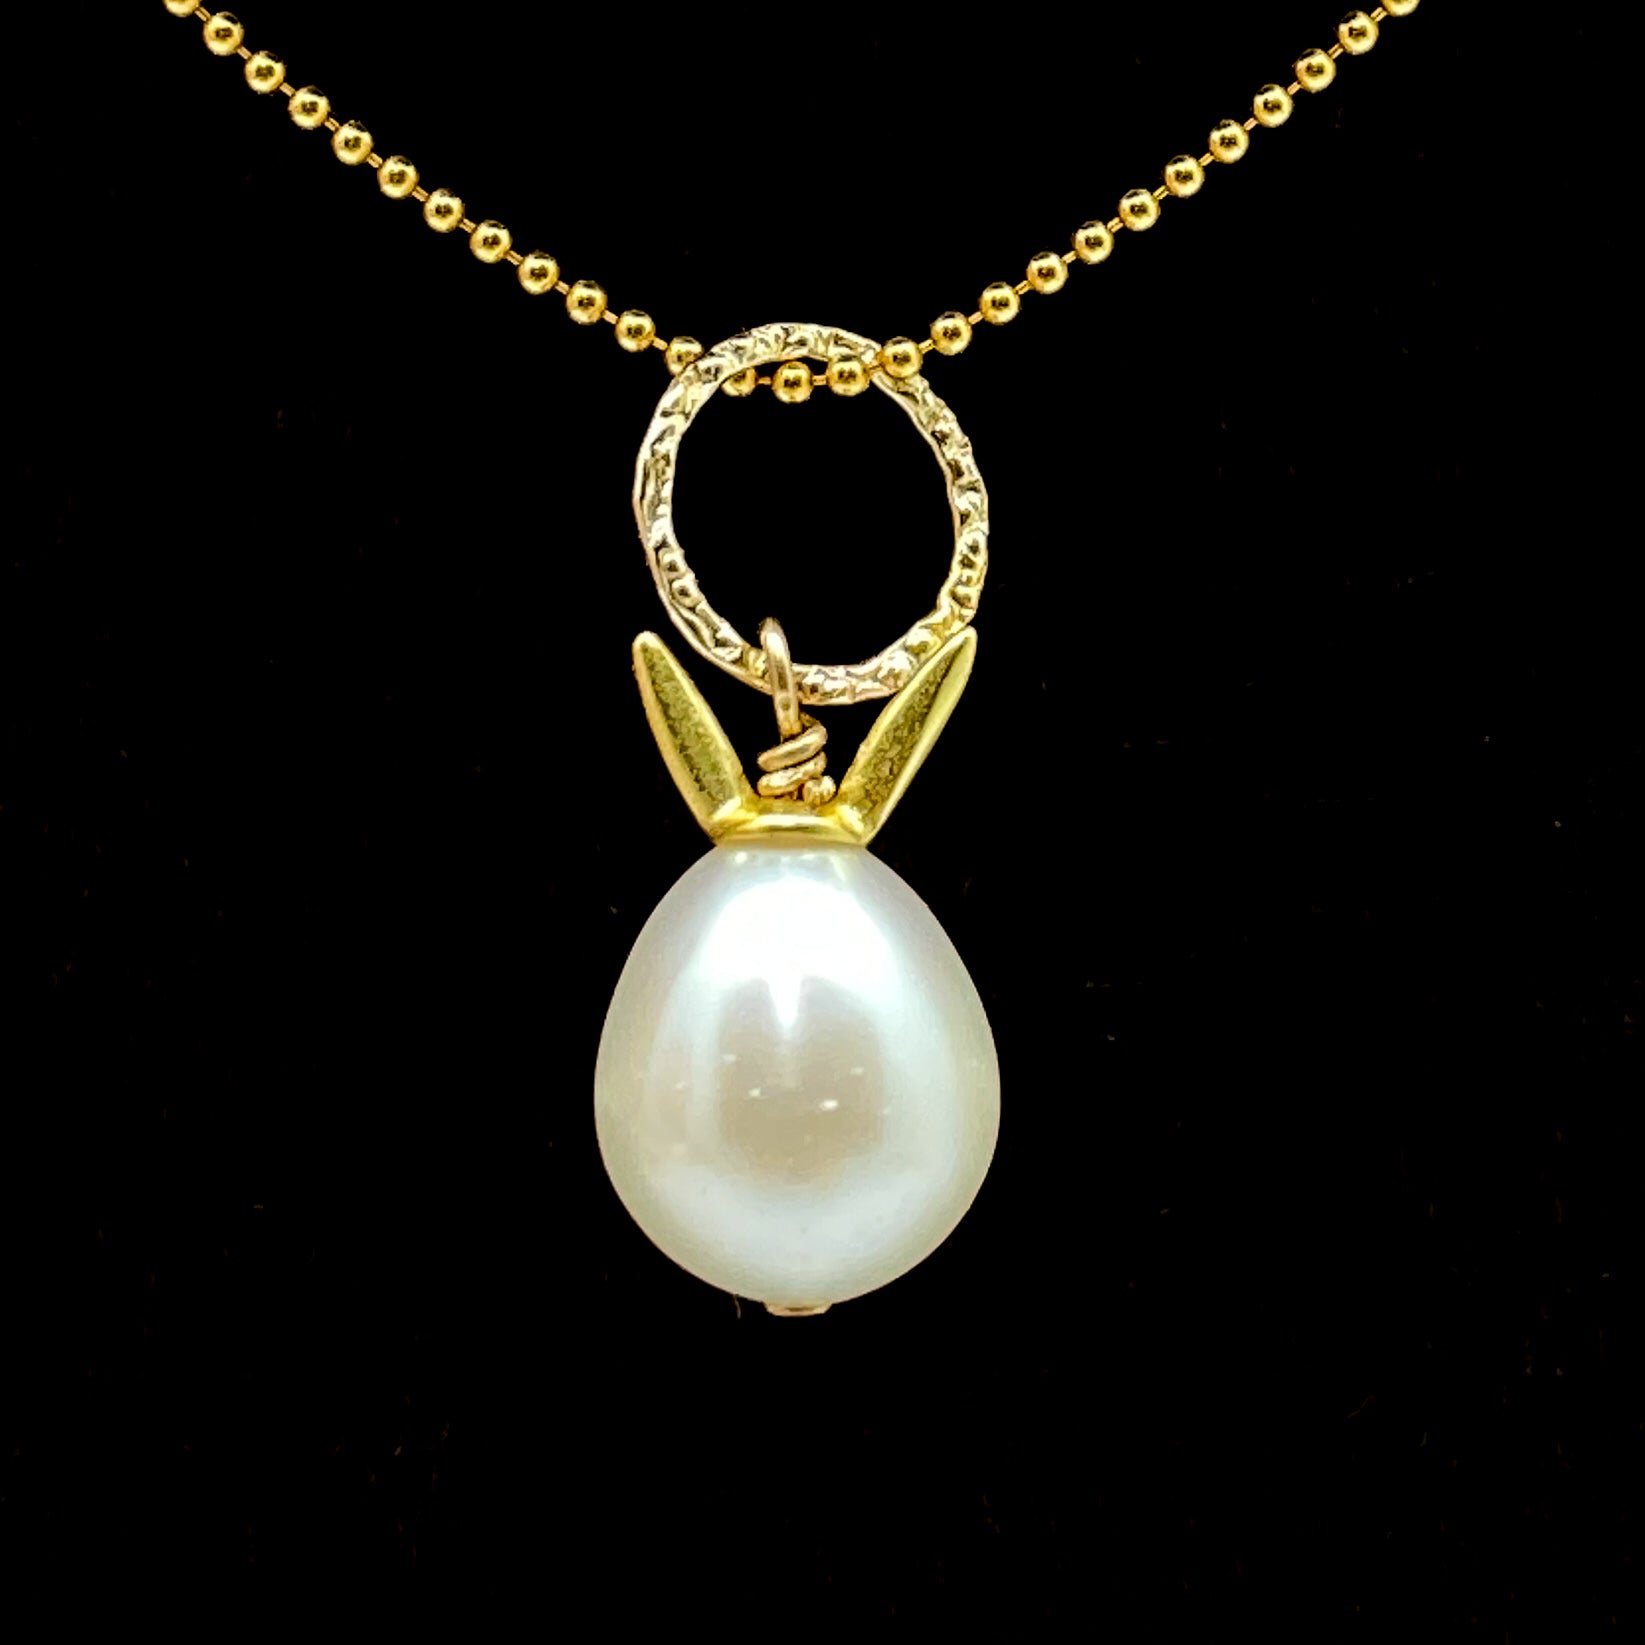 Bunny Ears Bead Cap (Gold Plated Sterling Silver) - 1 pc.